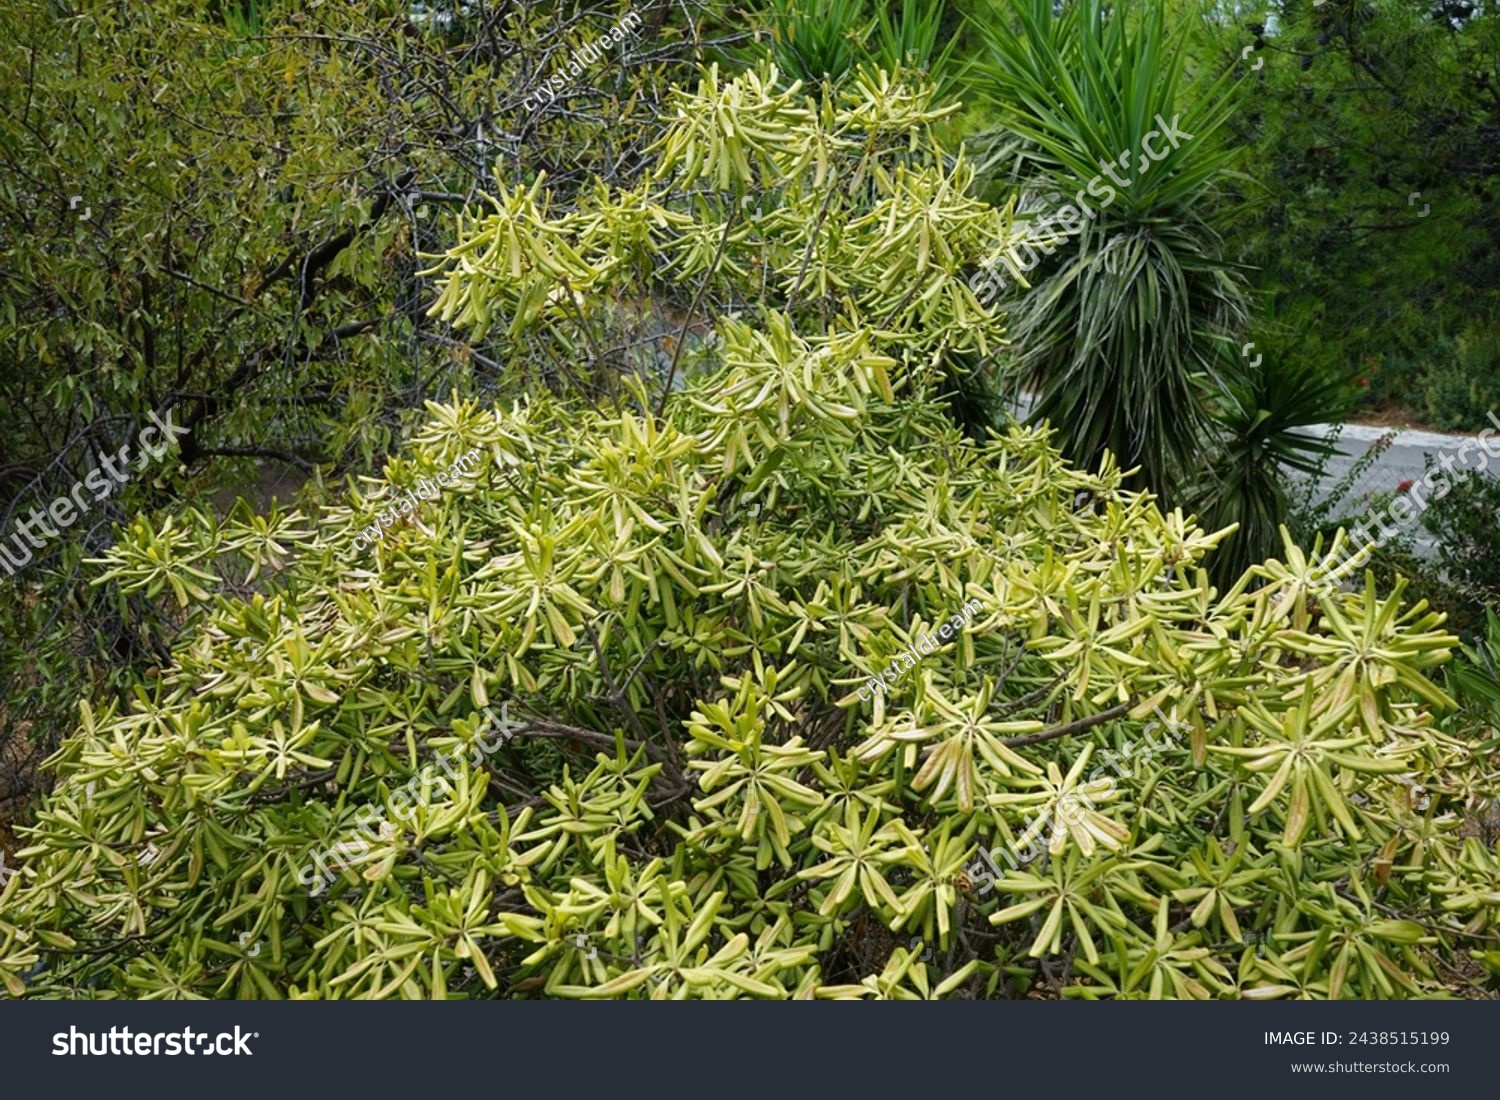 Euphorbia dendroides grows in August. Euphorbia dendroides, tree spurge, is a small tree or large shrub of the family Euphorbiaceae that grows in semi-arid and mediterranean climates. Rhodes Island #2438515199